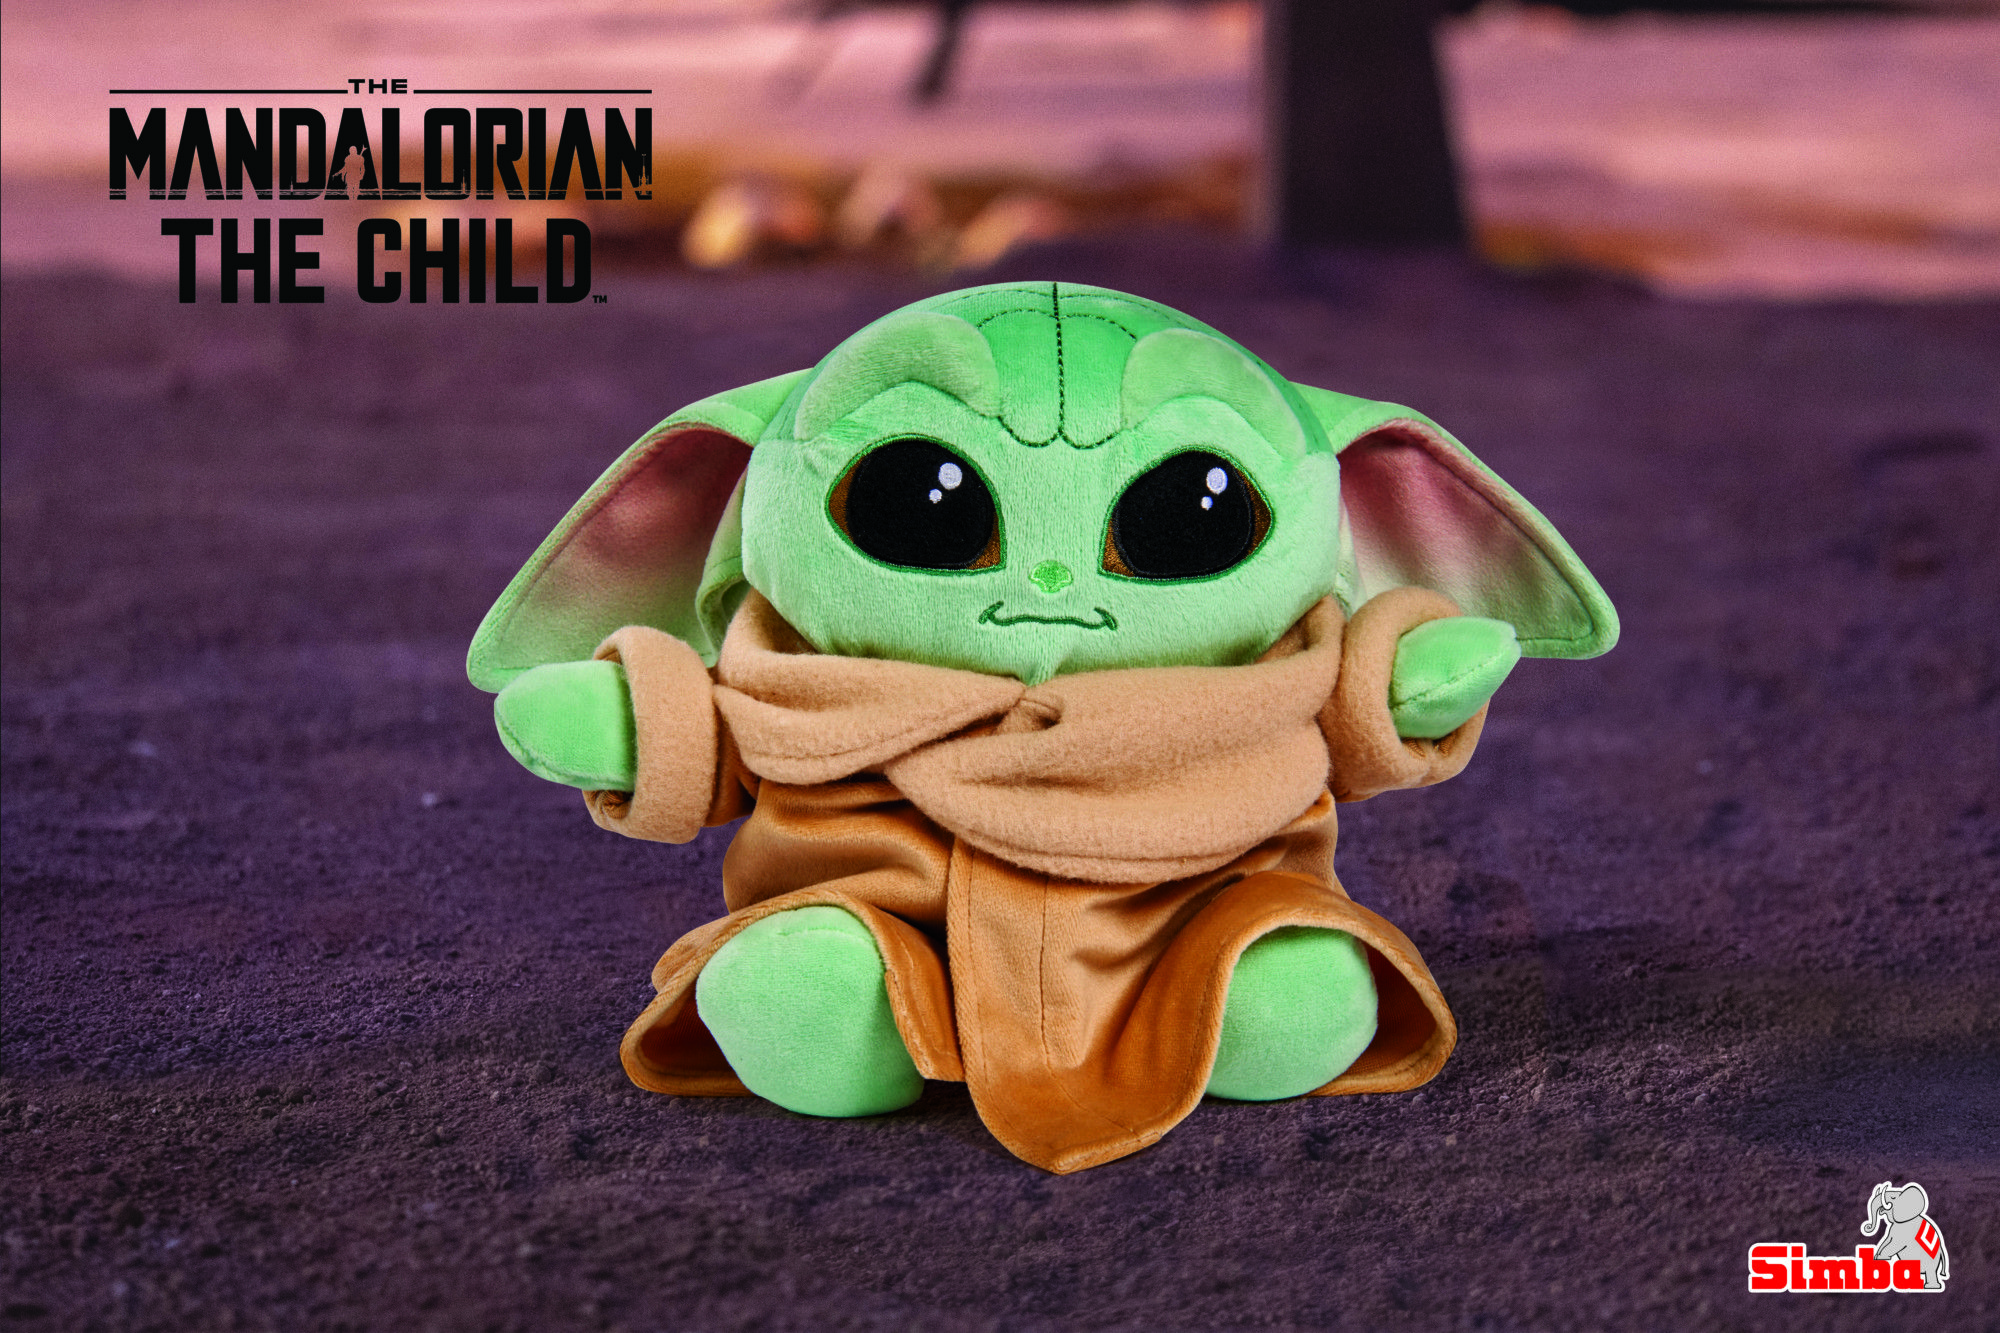 A plushie of The Child from The Mandalorian, a green alien with big eyes and a brown cloak, is sitting on the ground. - Baby Yoda